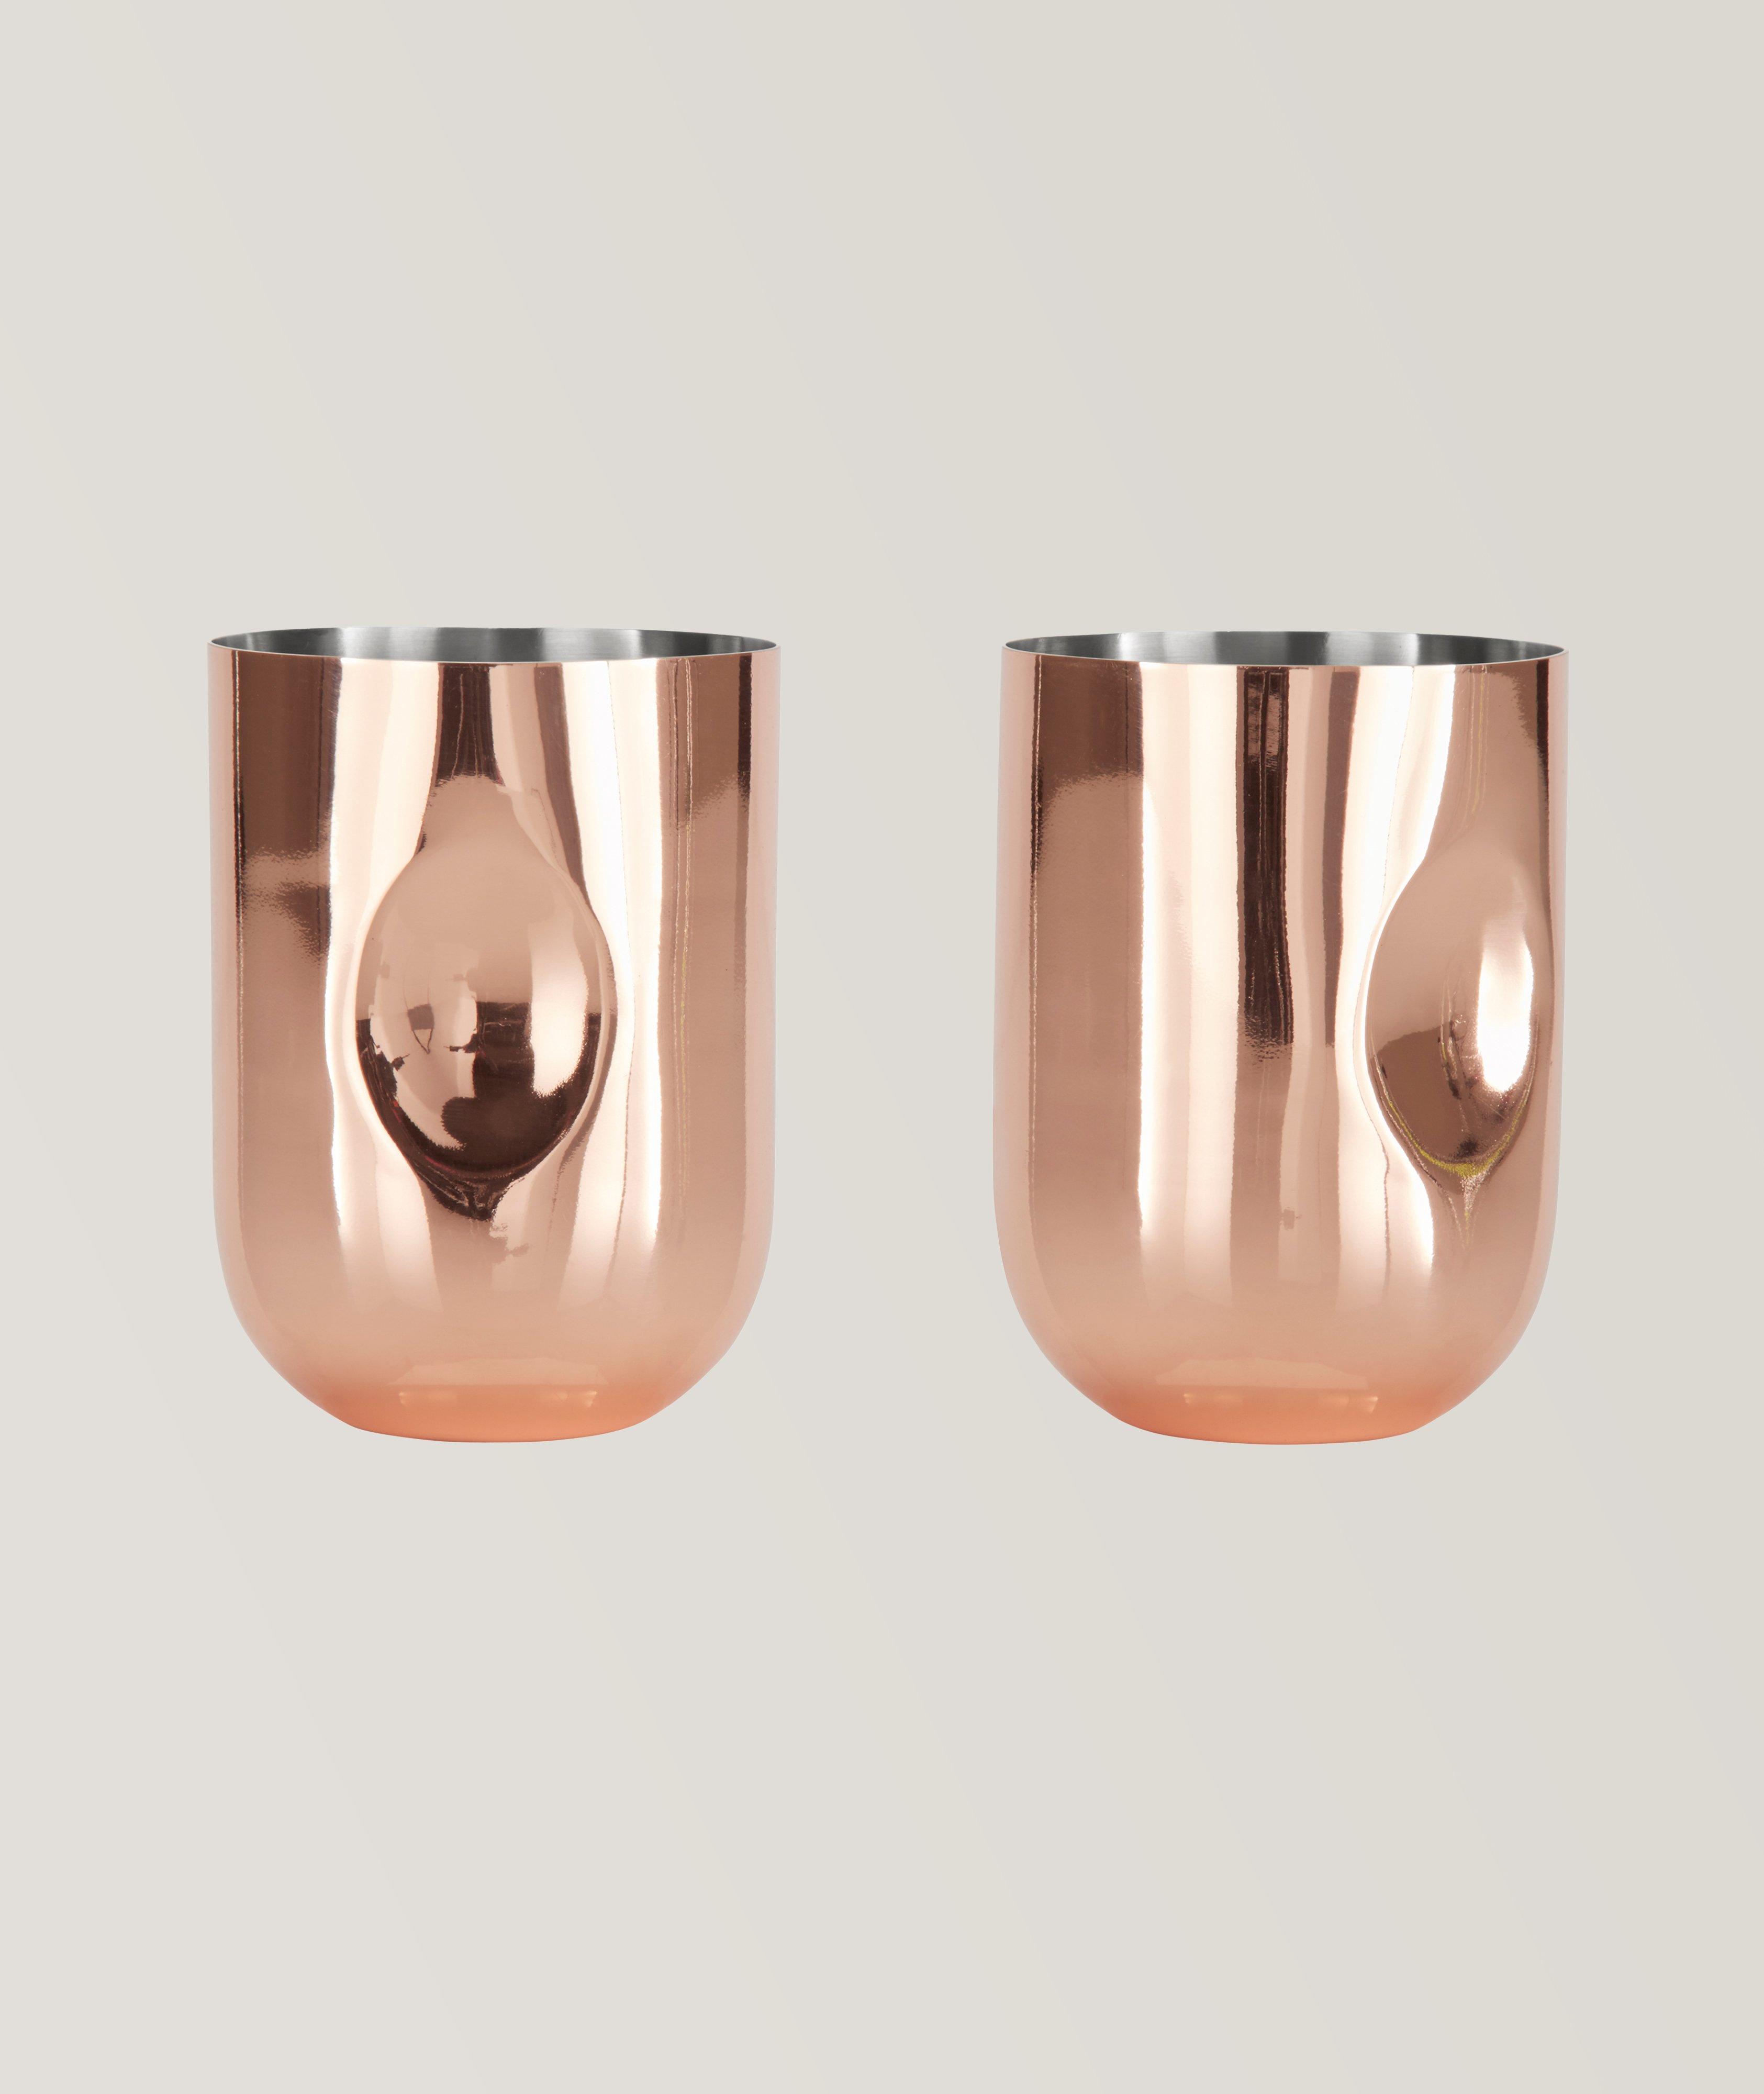 Plum Moscow Mule set 2 Pack image 0